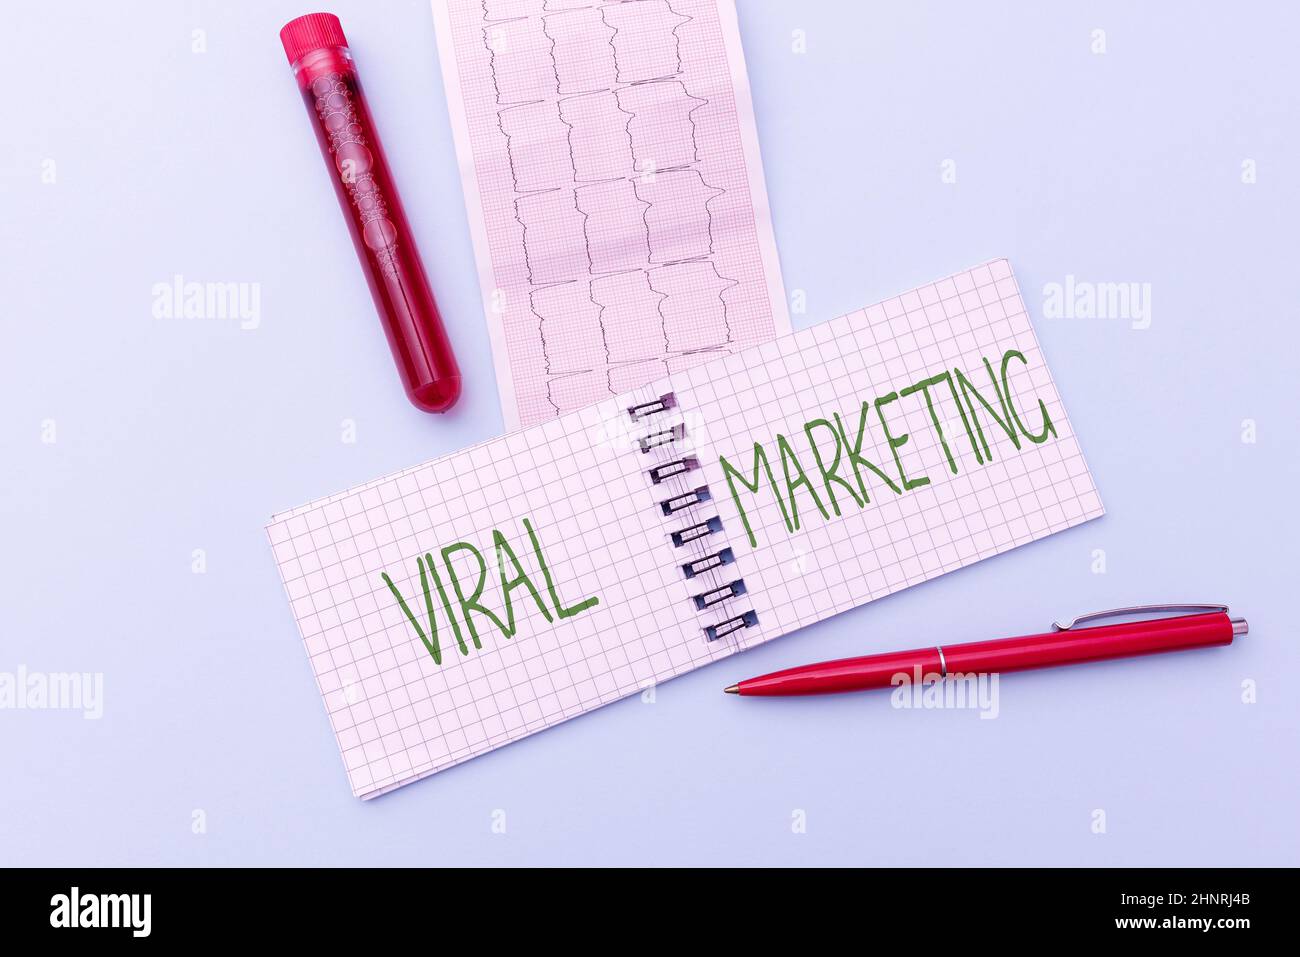 Inspiration showing sign Viral Marketing. Business concept whereby consumer encouraged share information via Internet Reading Graph And Writing Important Medical Notes Test Result Analysis Stock Photo